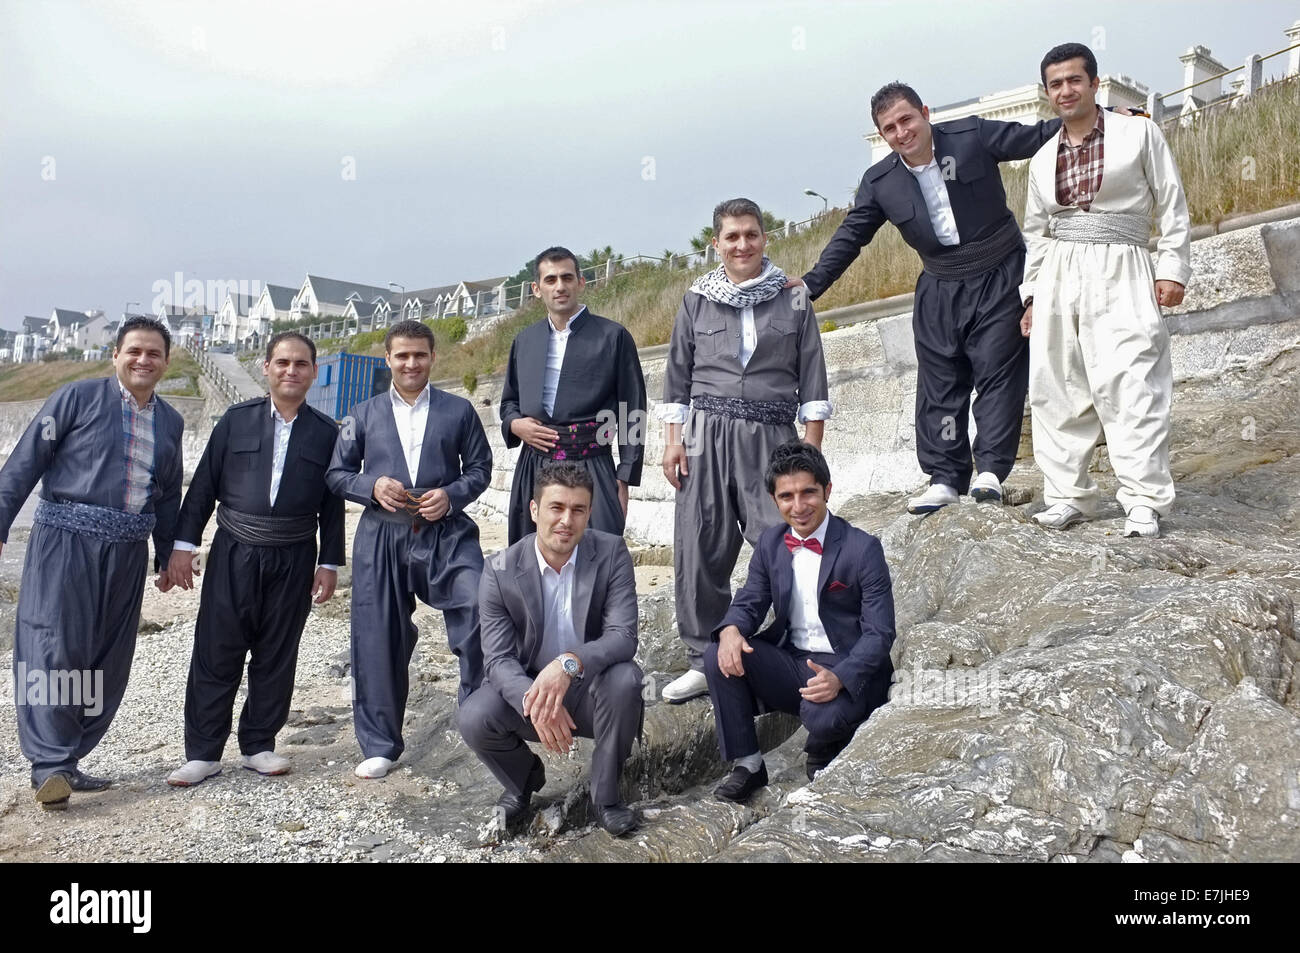 Group of Kurdistani men celebrate their friends forthcoming marriage an a beach in Falmouth. Groom is third from right standing. Stock Photo